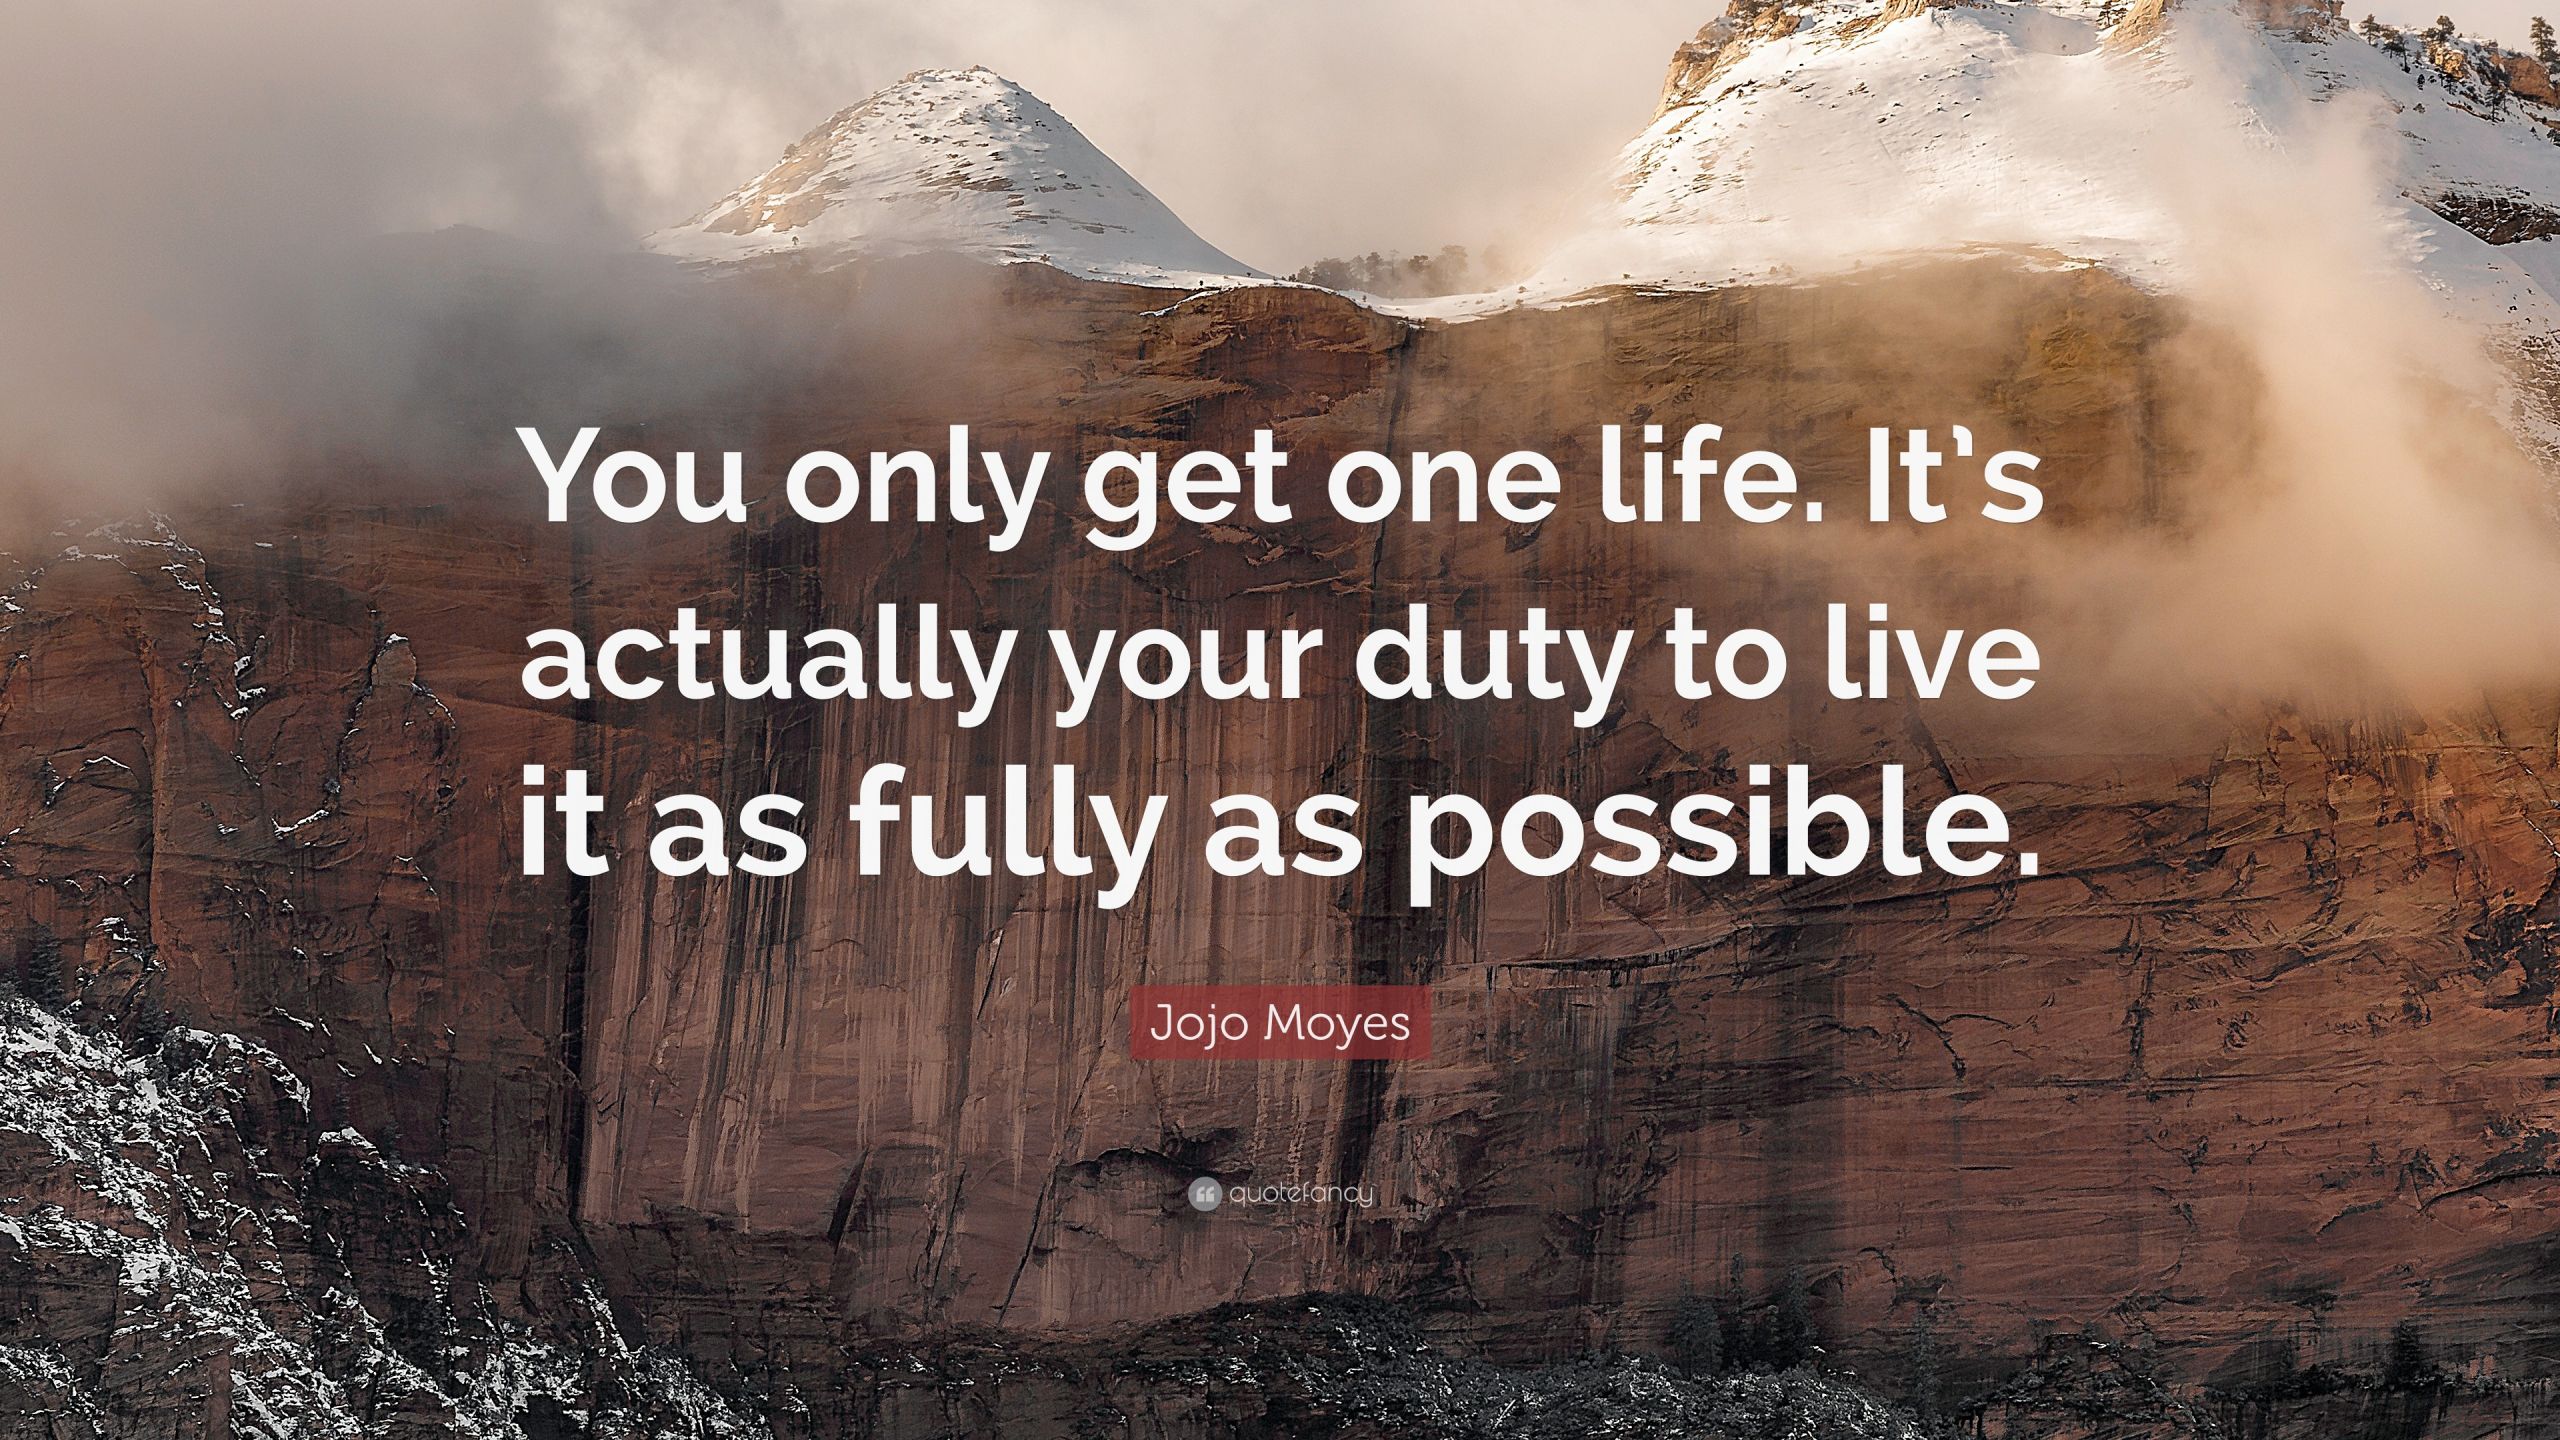 One Life Quotes
 Jojo Moyes Quote “You only one life It’s actually